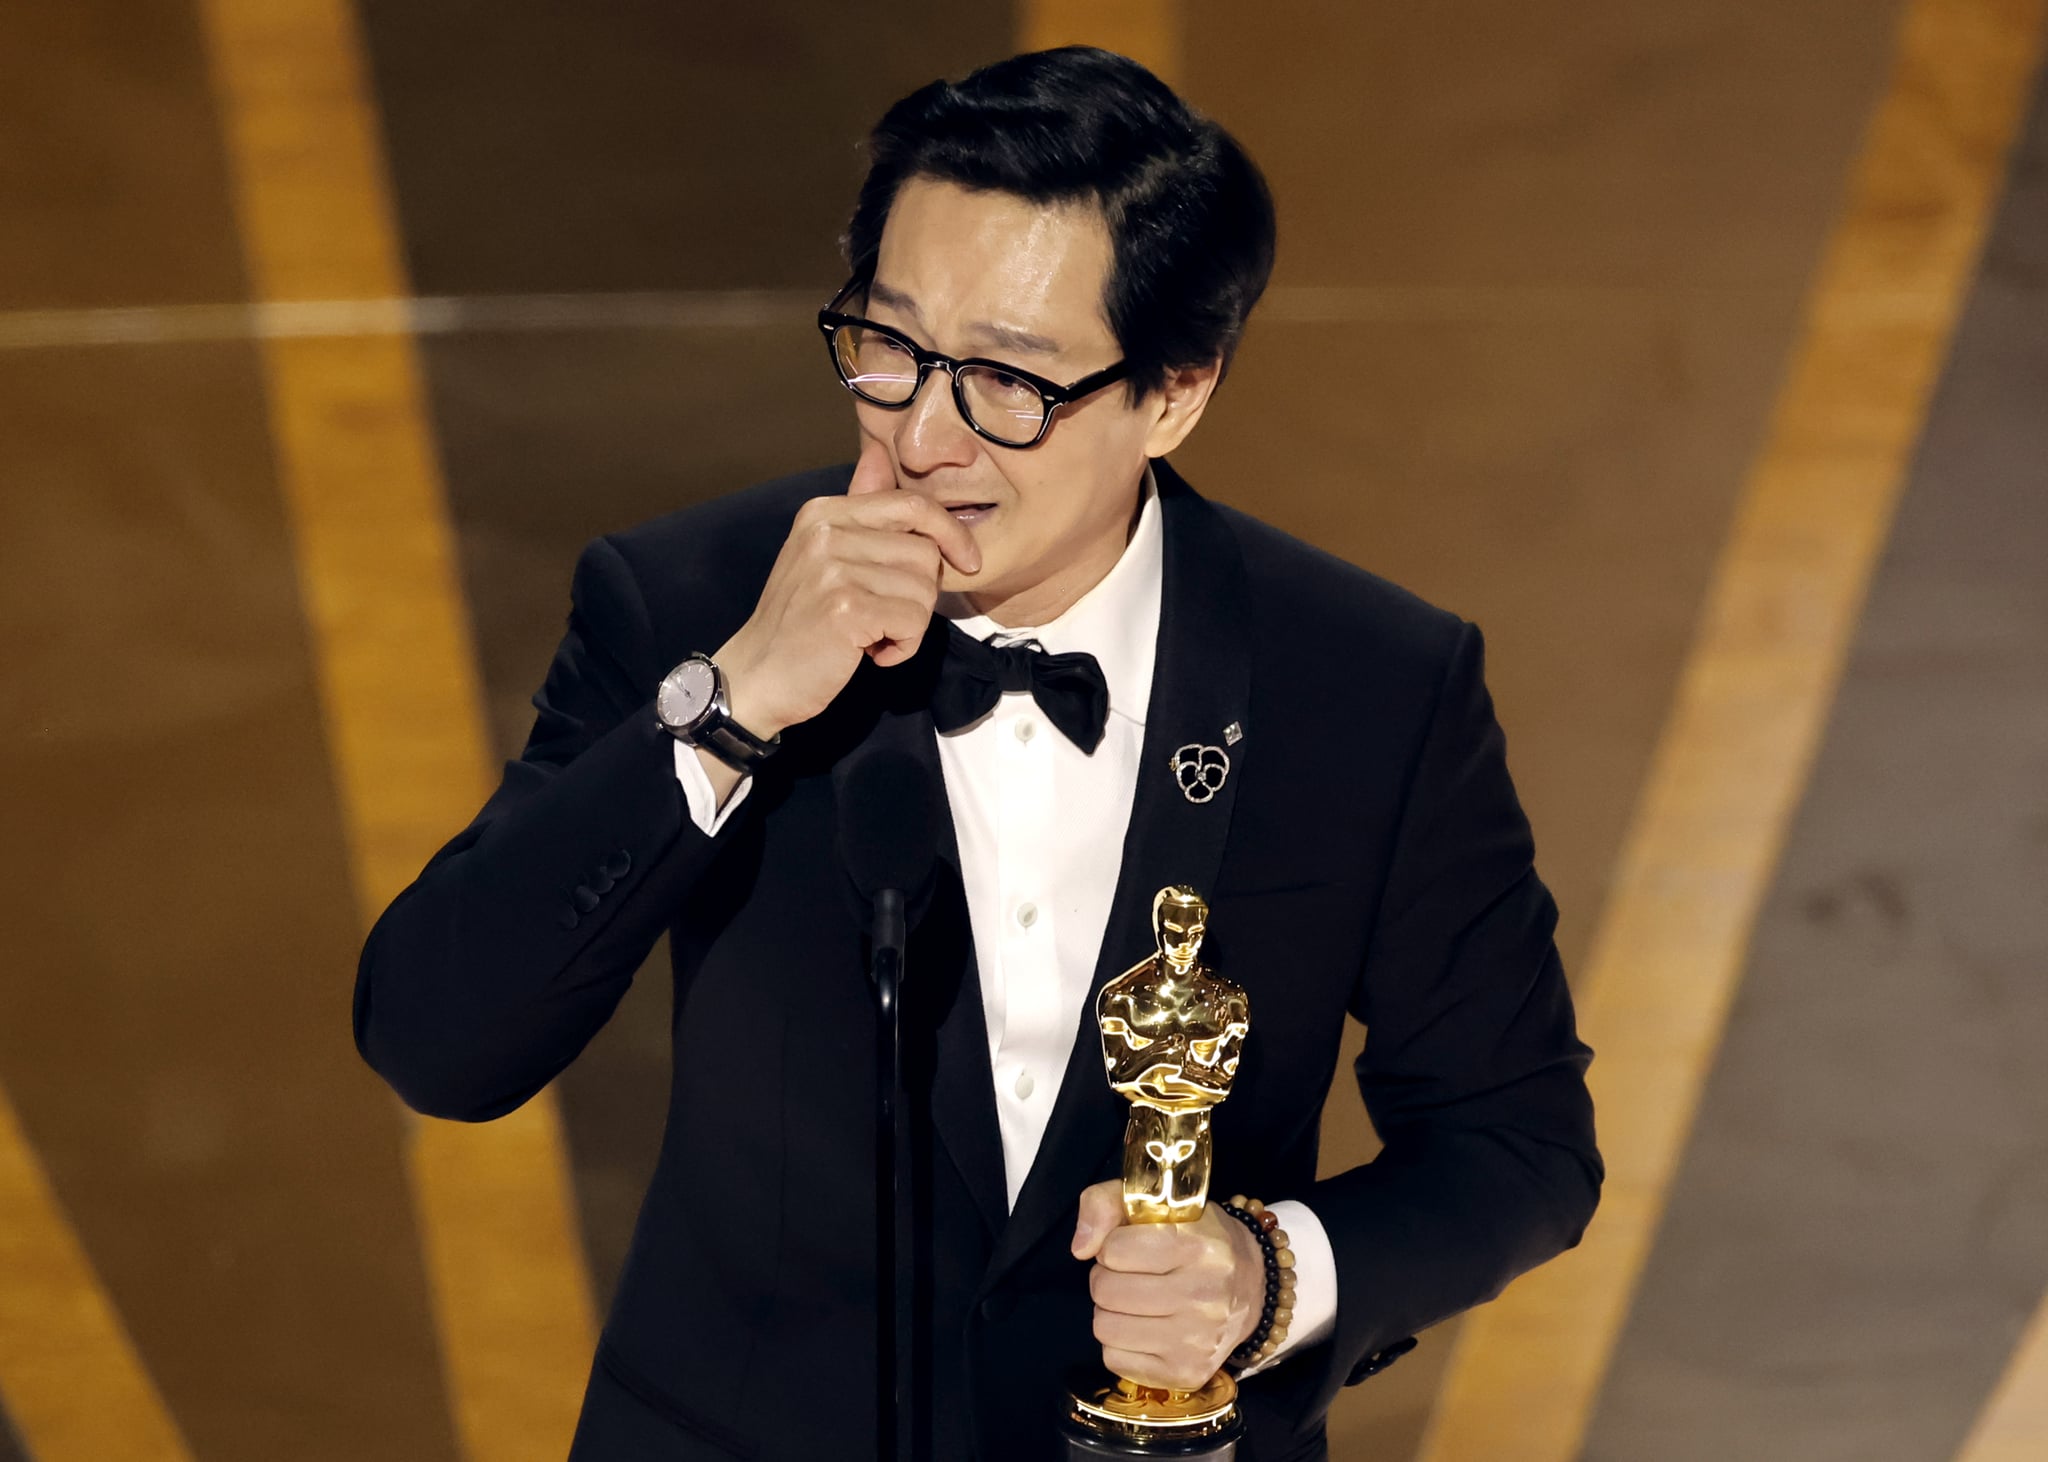 HOLLYWOOD, CALIFORNIA - MARCH 12: Ke Huy Quan accepts the Best Supporting Actor award